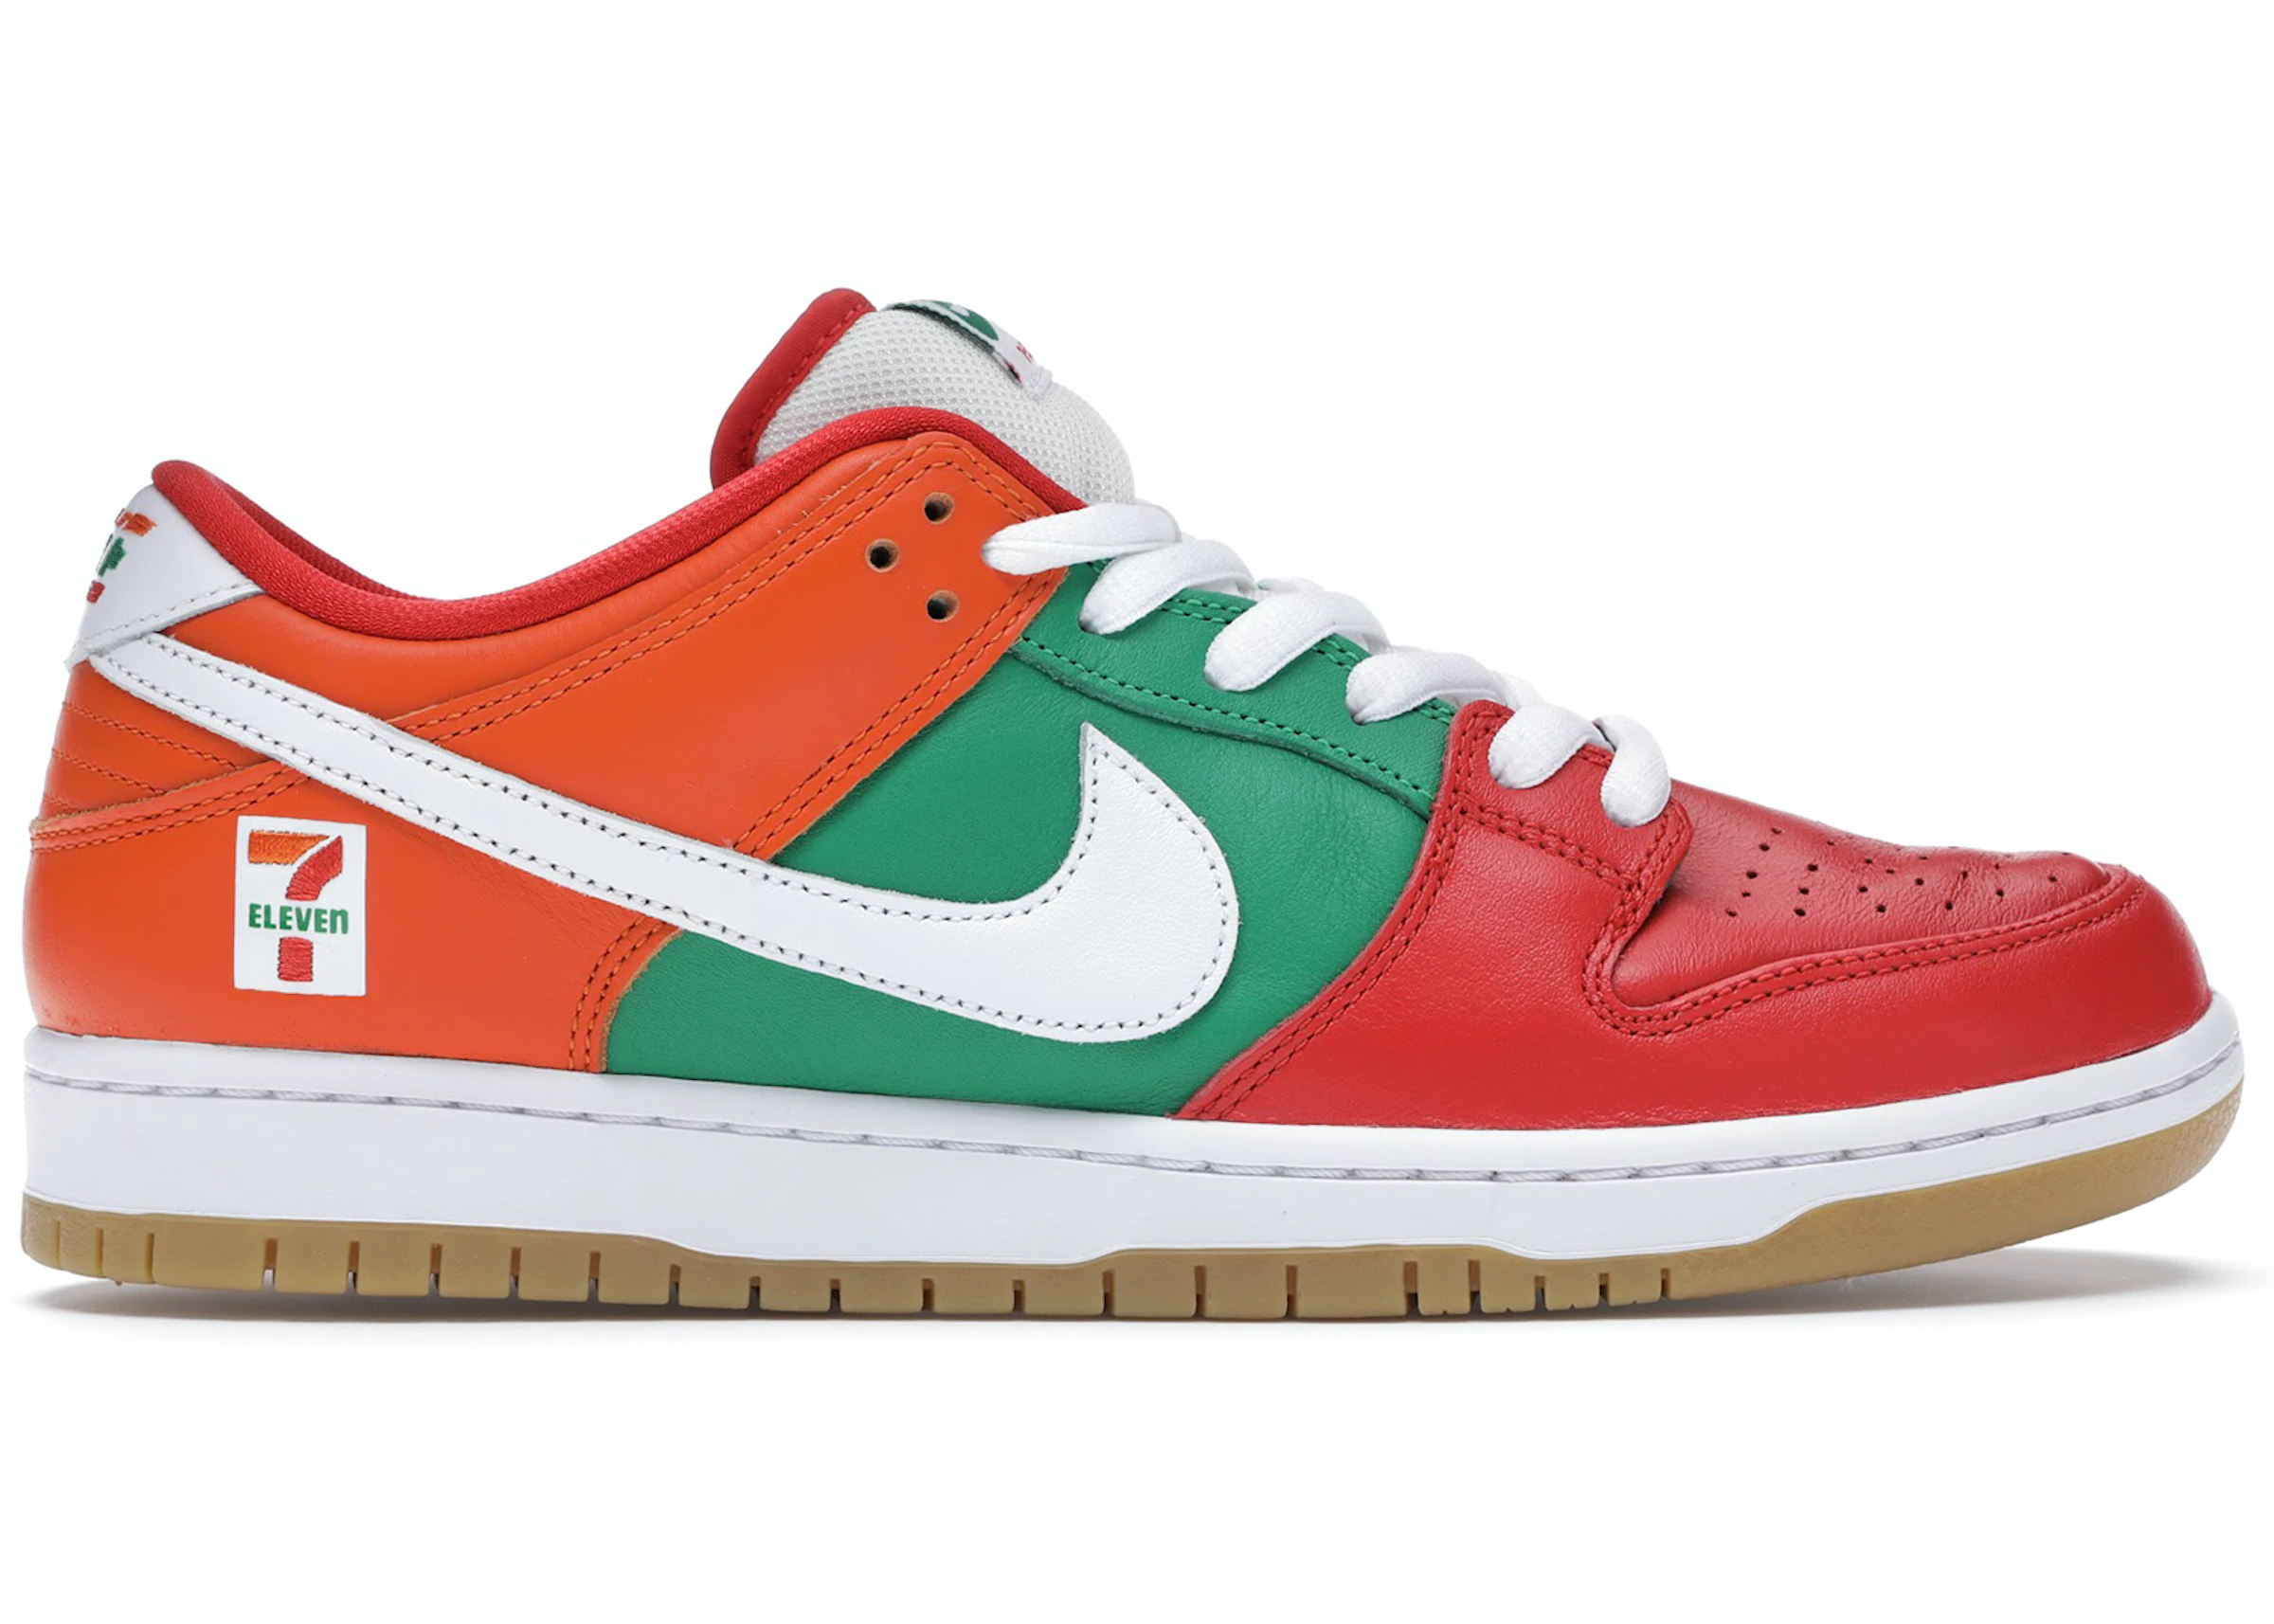 Deliberate Playwright infinite Nike SB Dunk Low 7-Eleven - CZ5130-600 - US